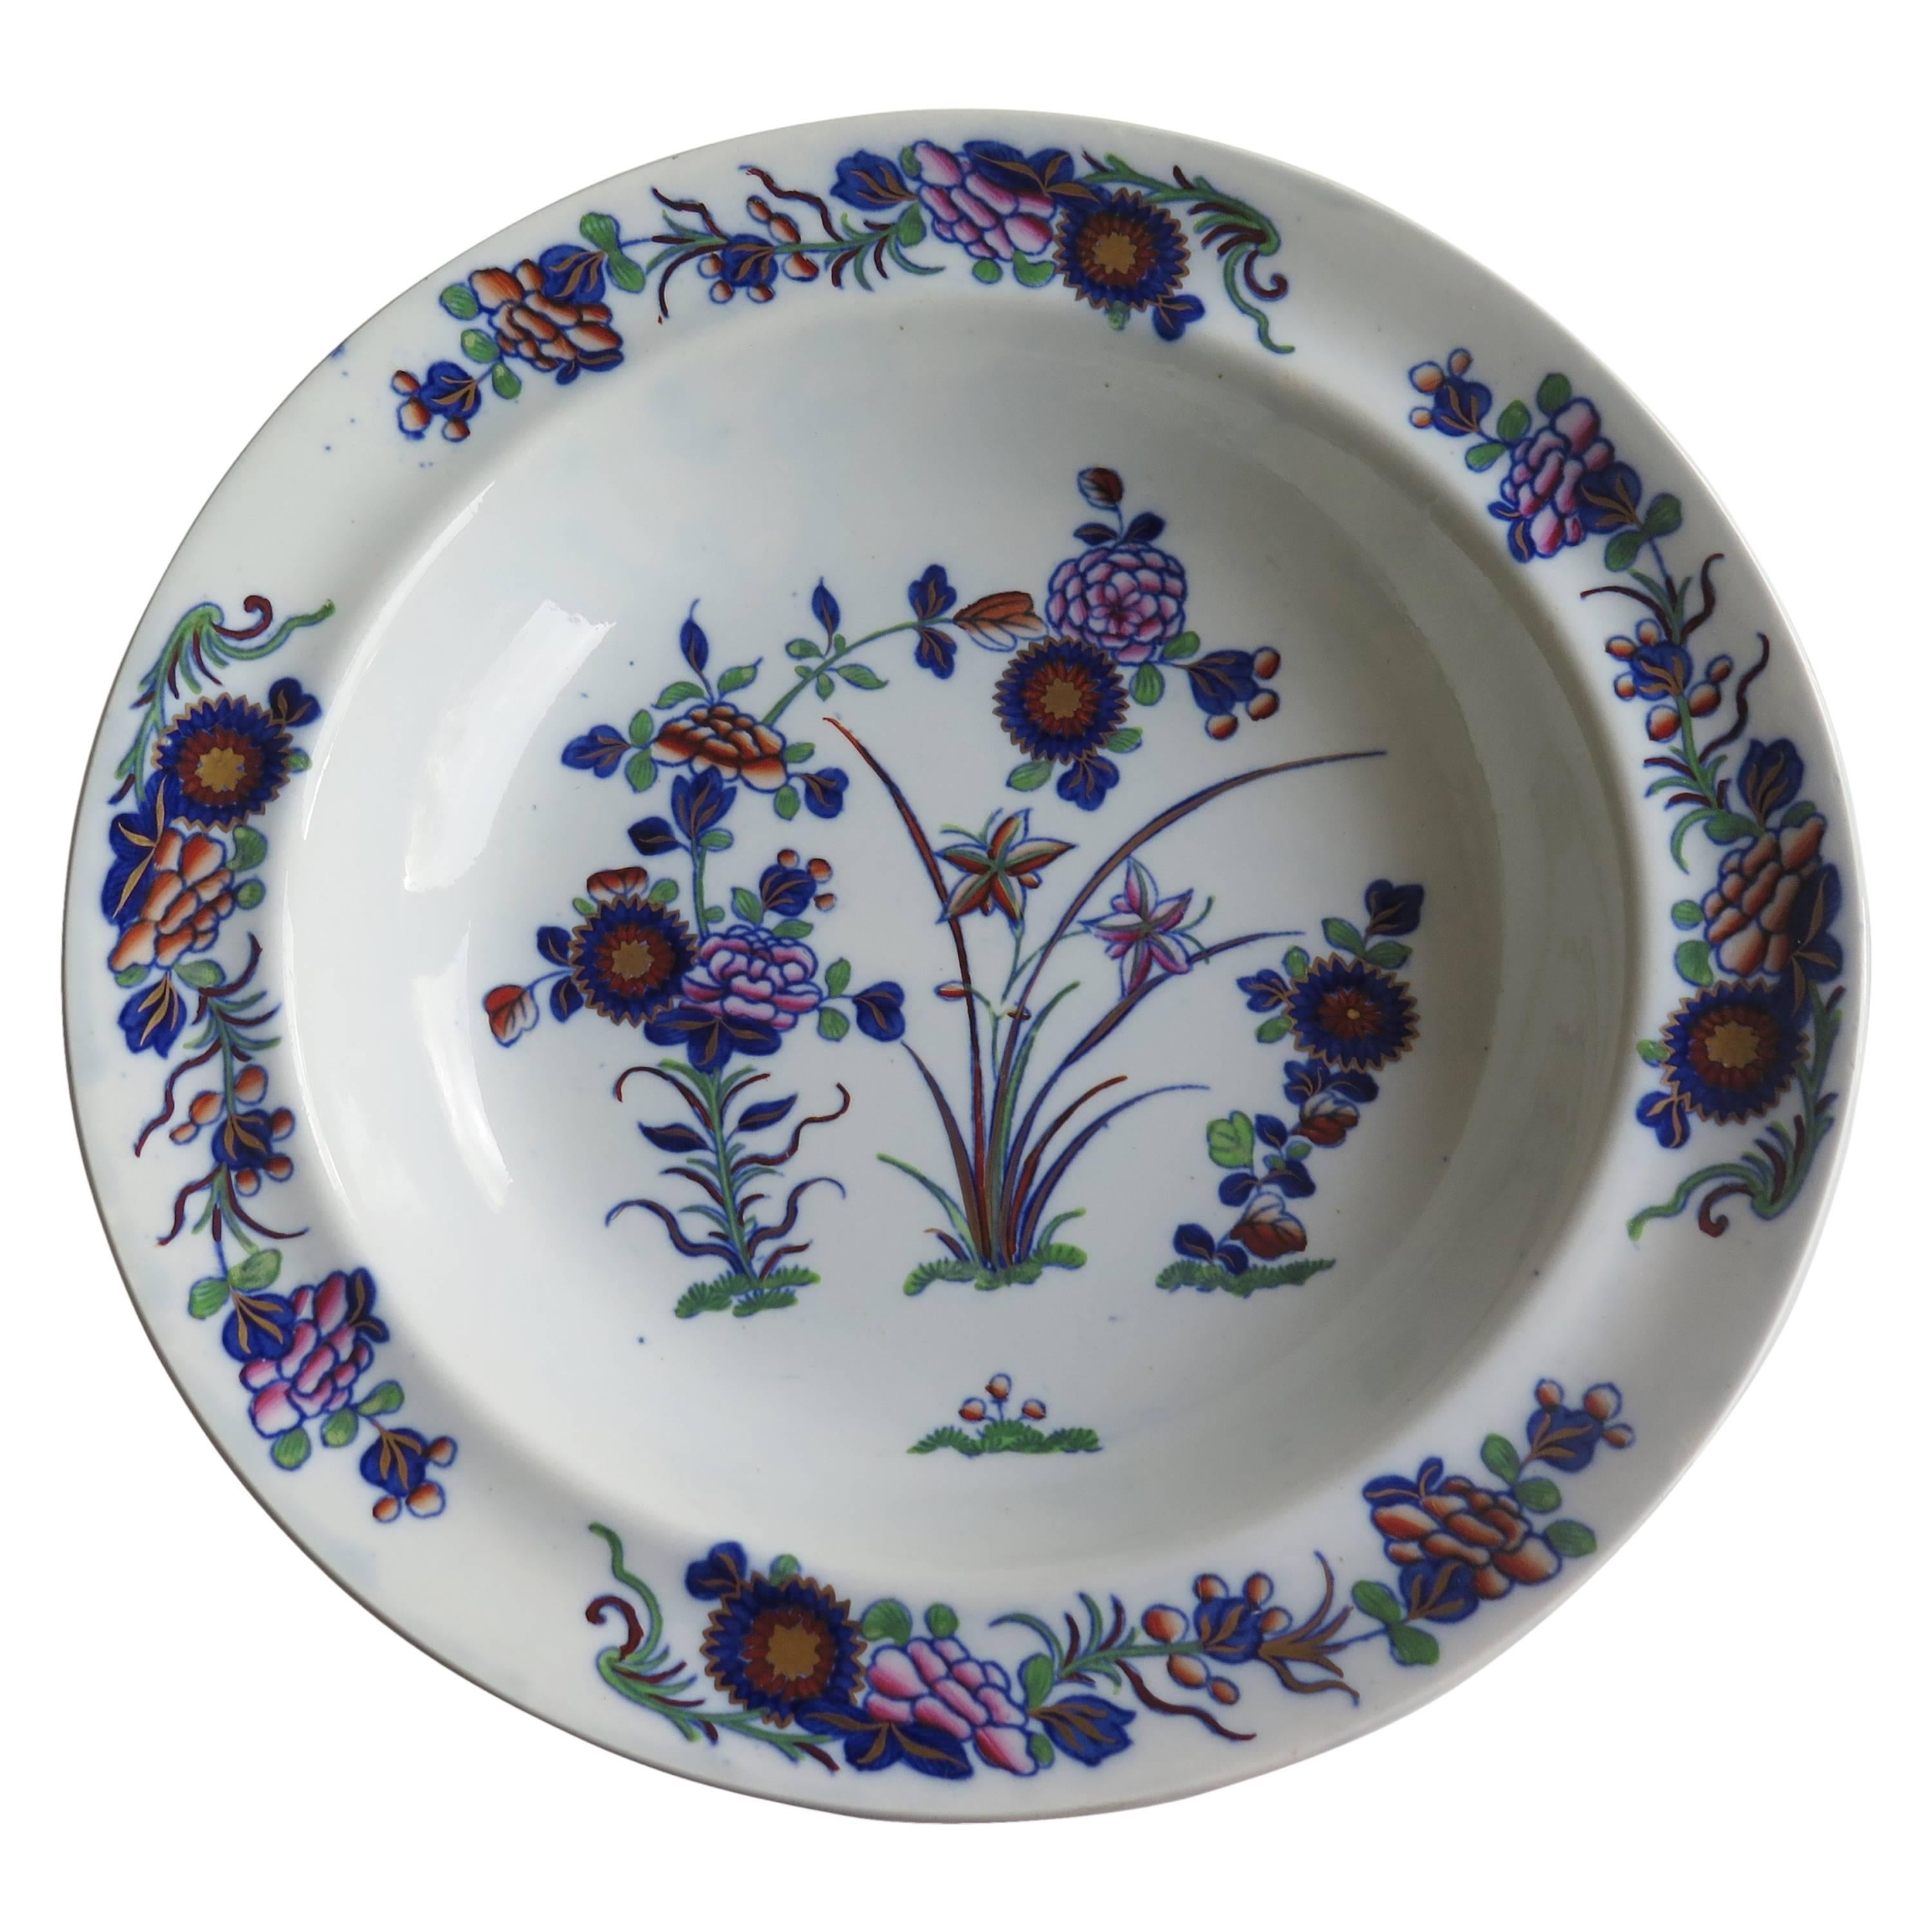 This is a beautiful bowl or deep plate produced by the Spode factory and made of a type of a pottery called Pearl-ware, in the early 19th Century.

The pattern is called 